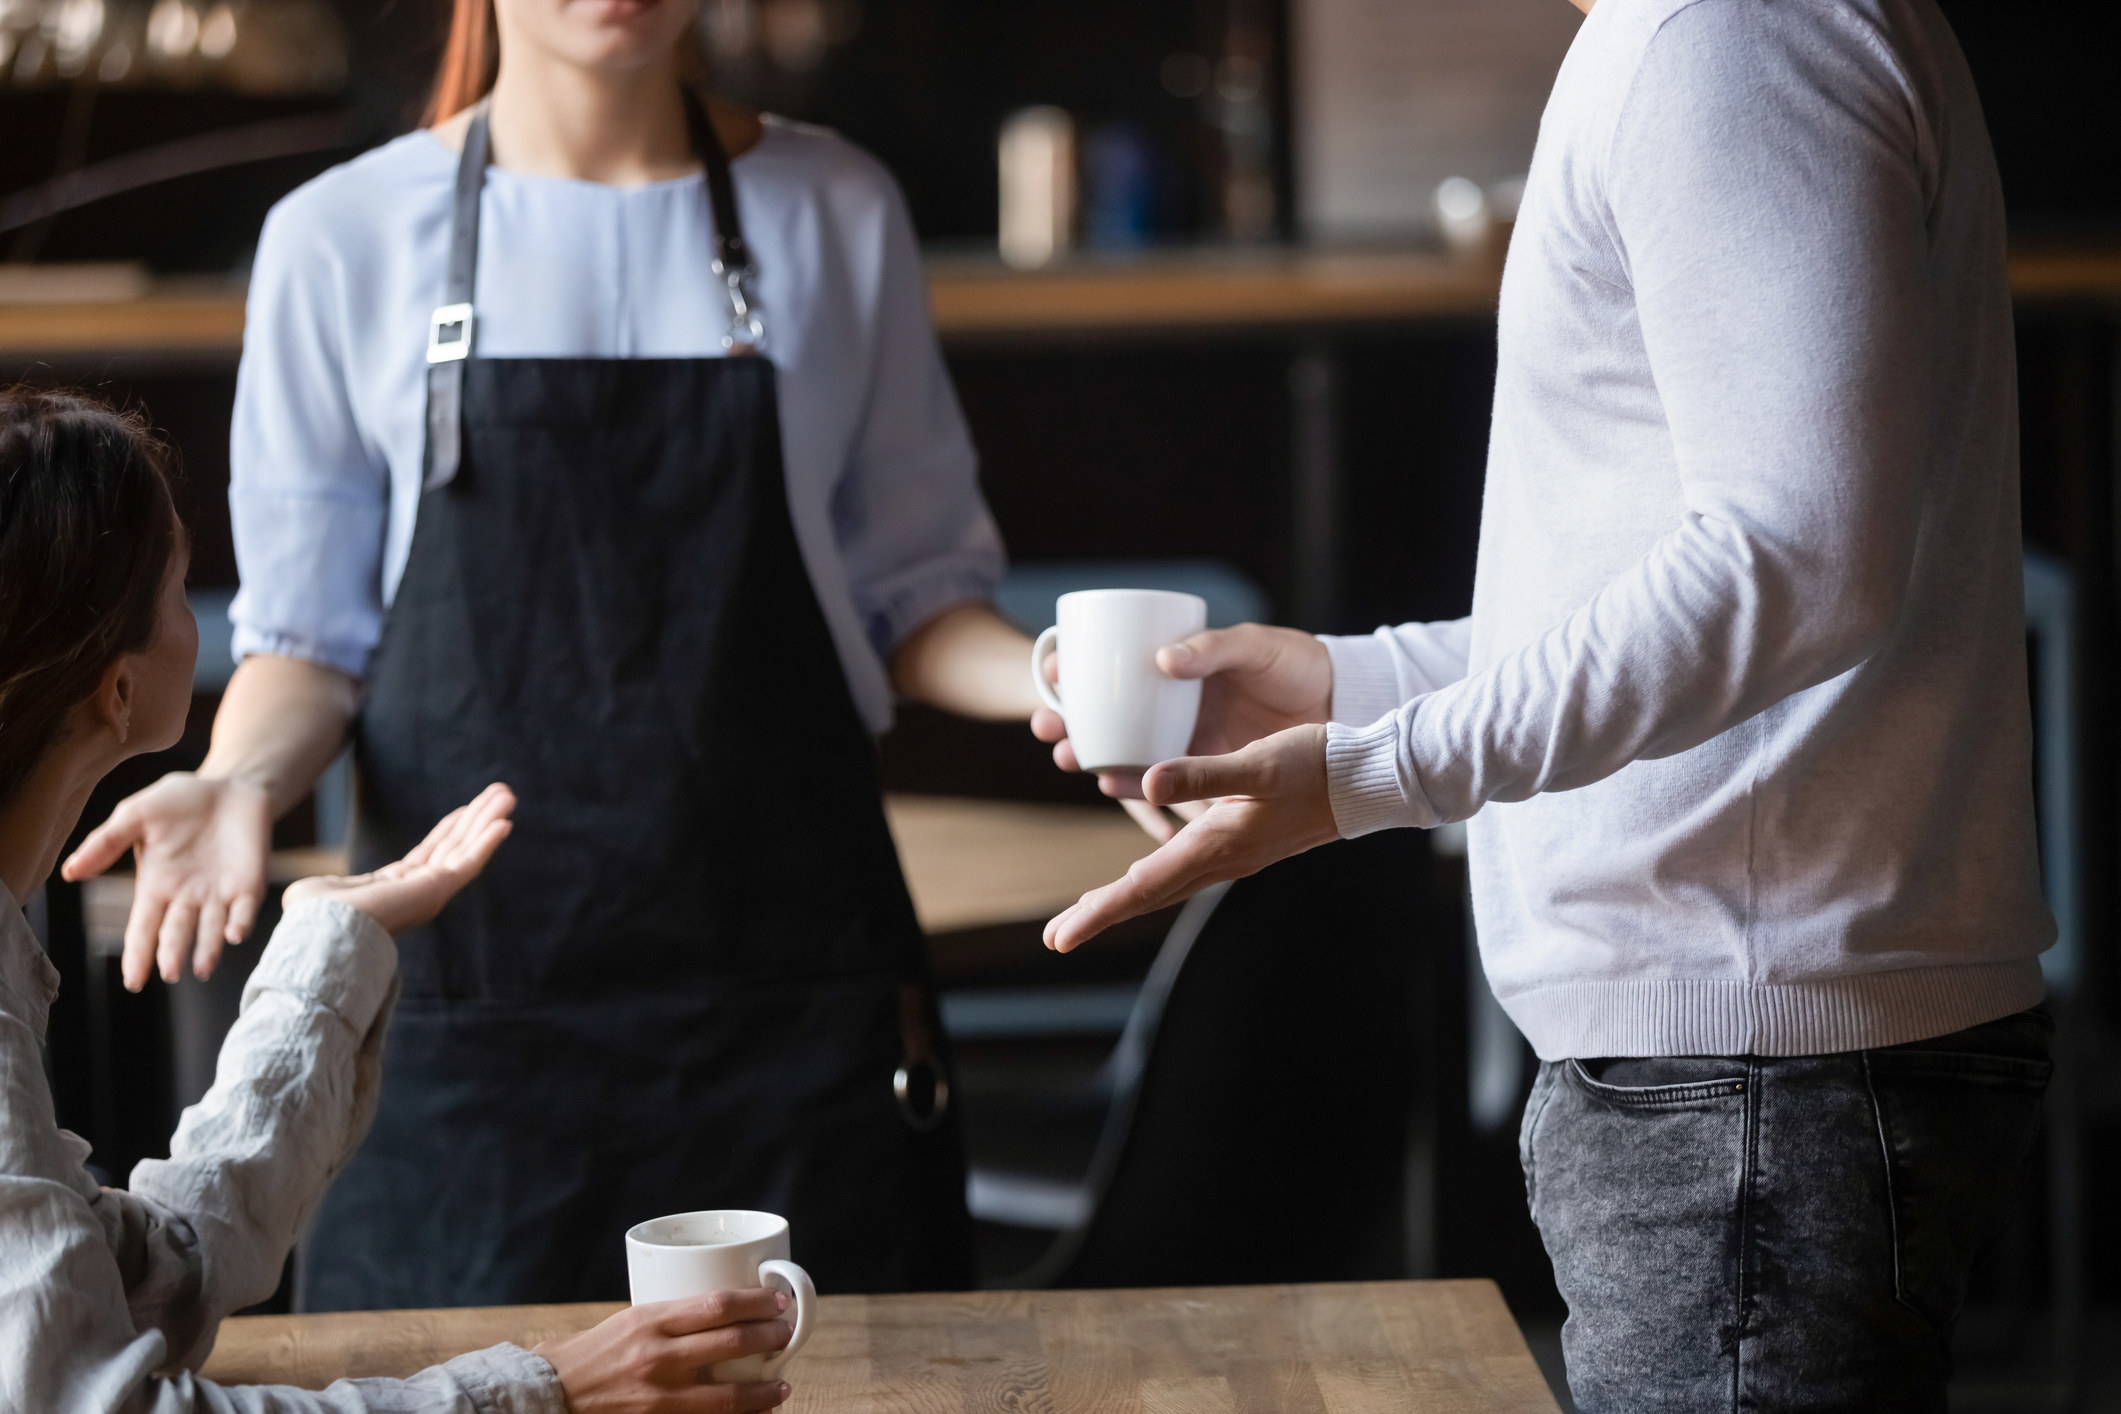 A stock image of two customers at a table holding their hands up as a worker stands in front of them